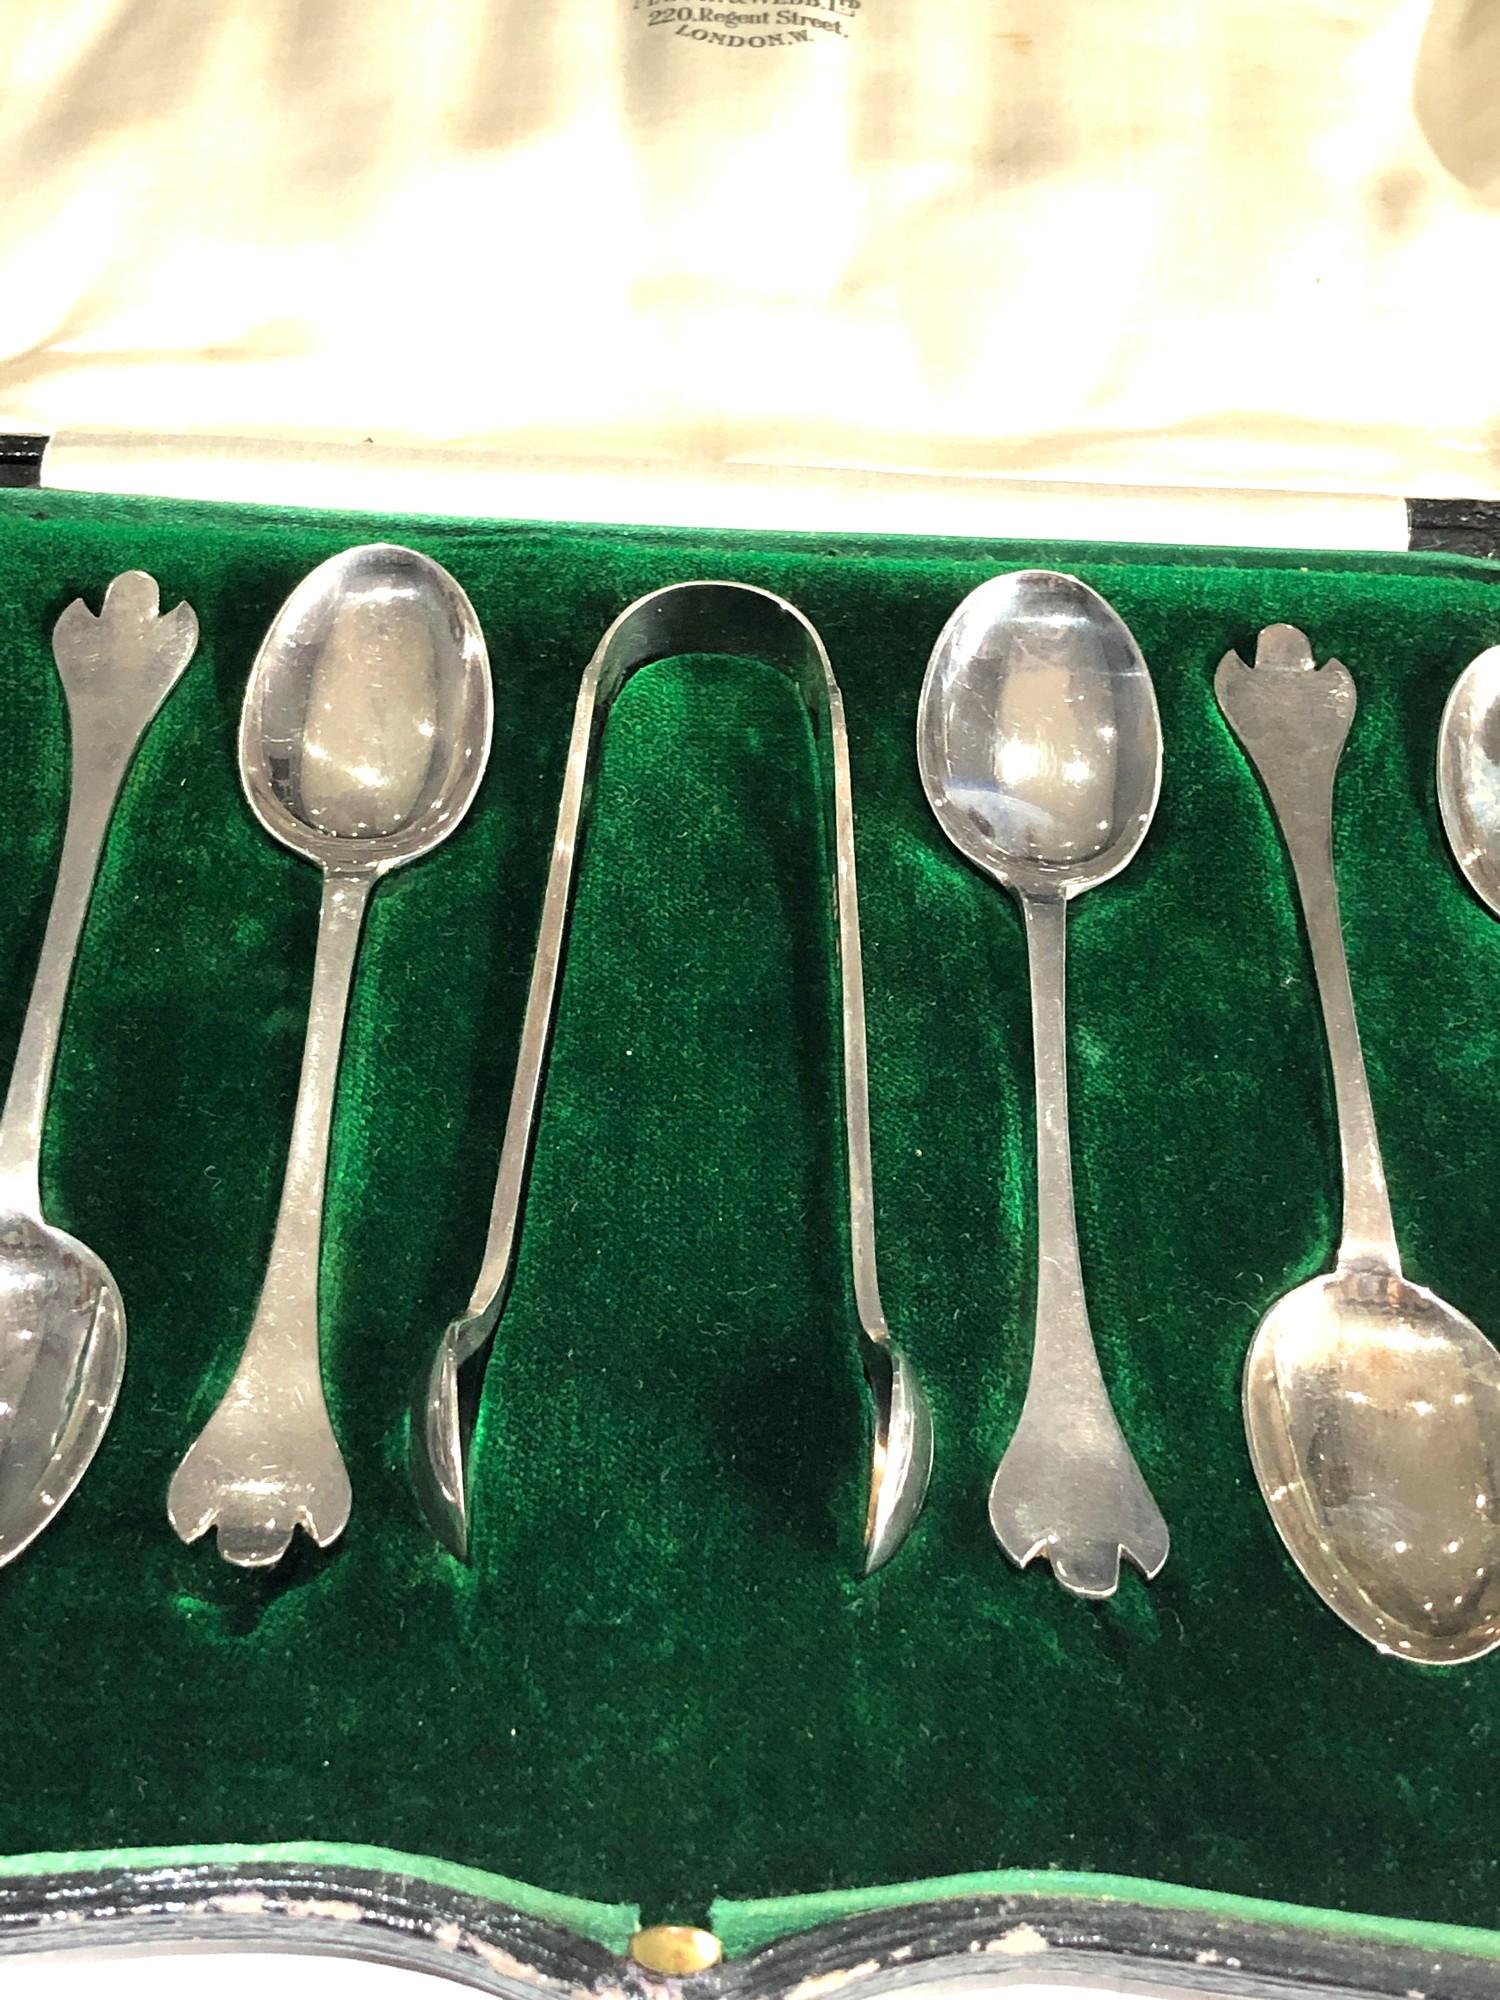 Boxed set of mappin & webb silver tea spoons and sugar tongues - Image 2 of 4